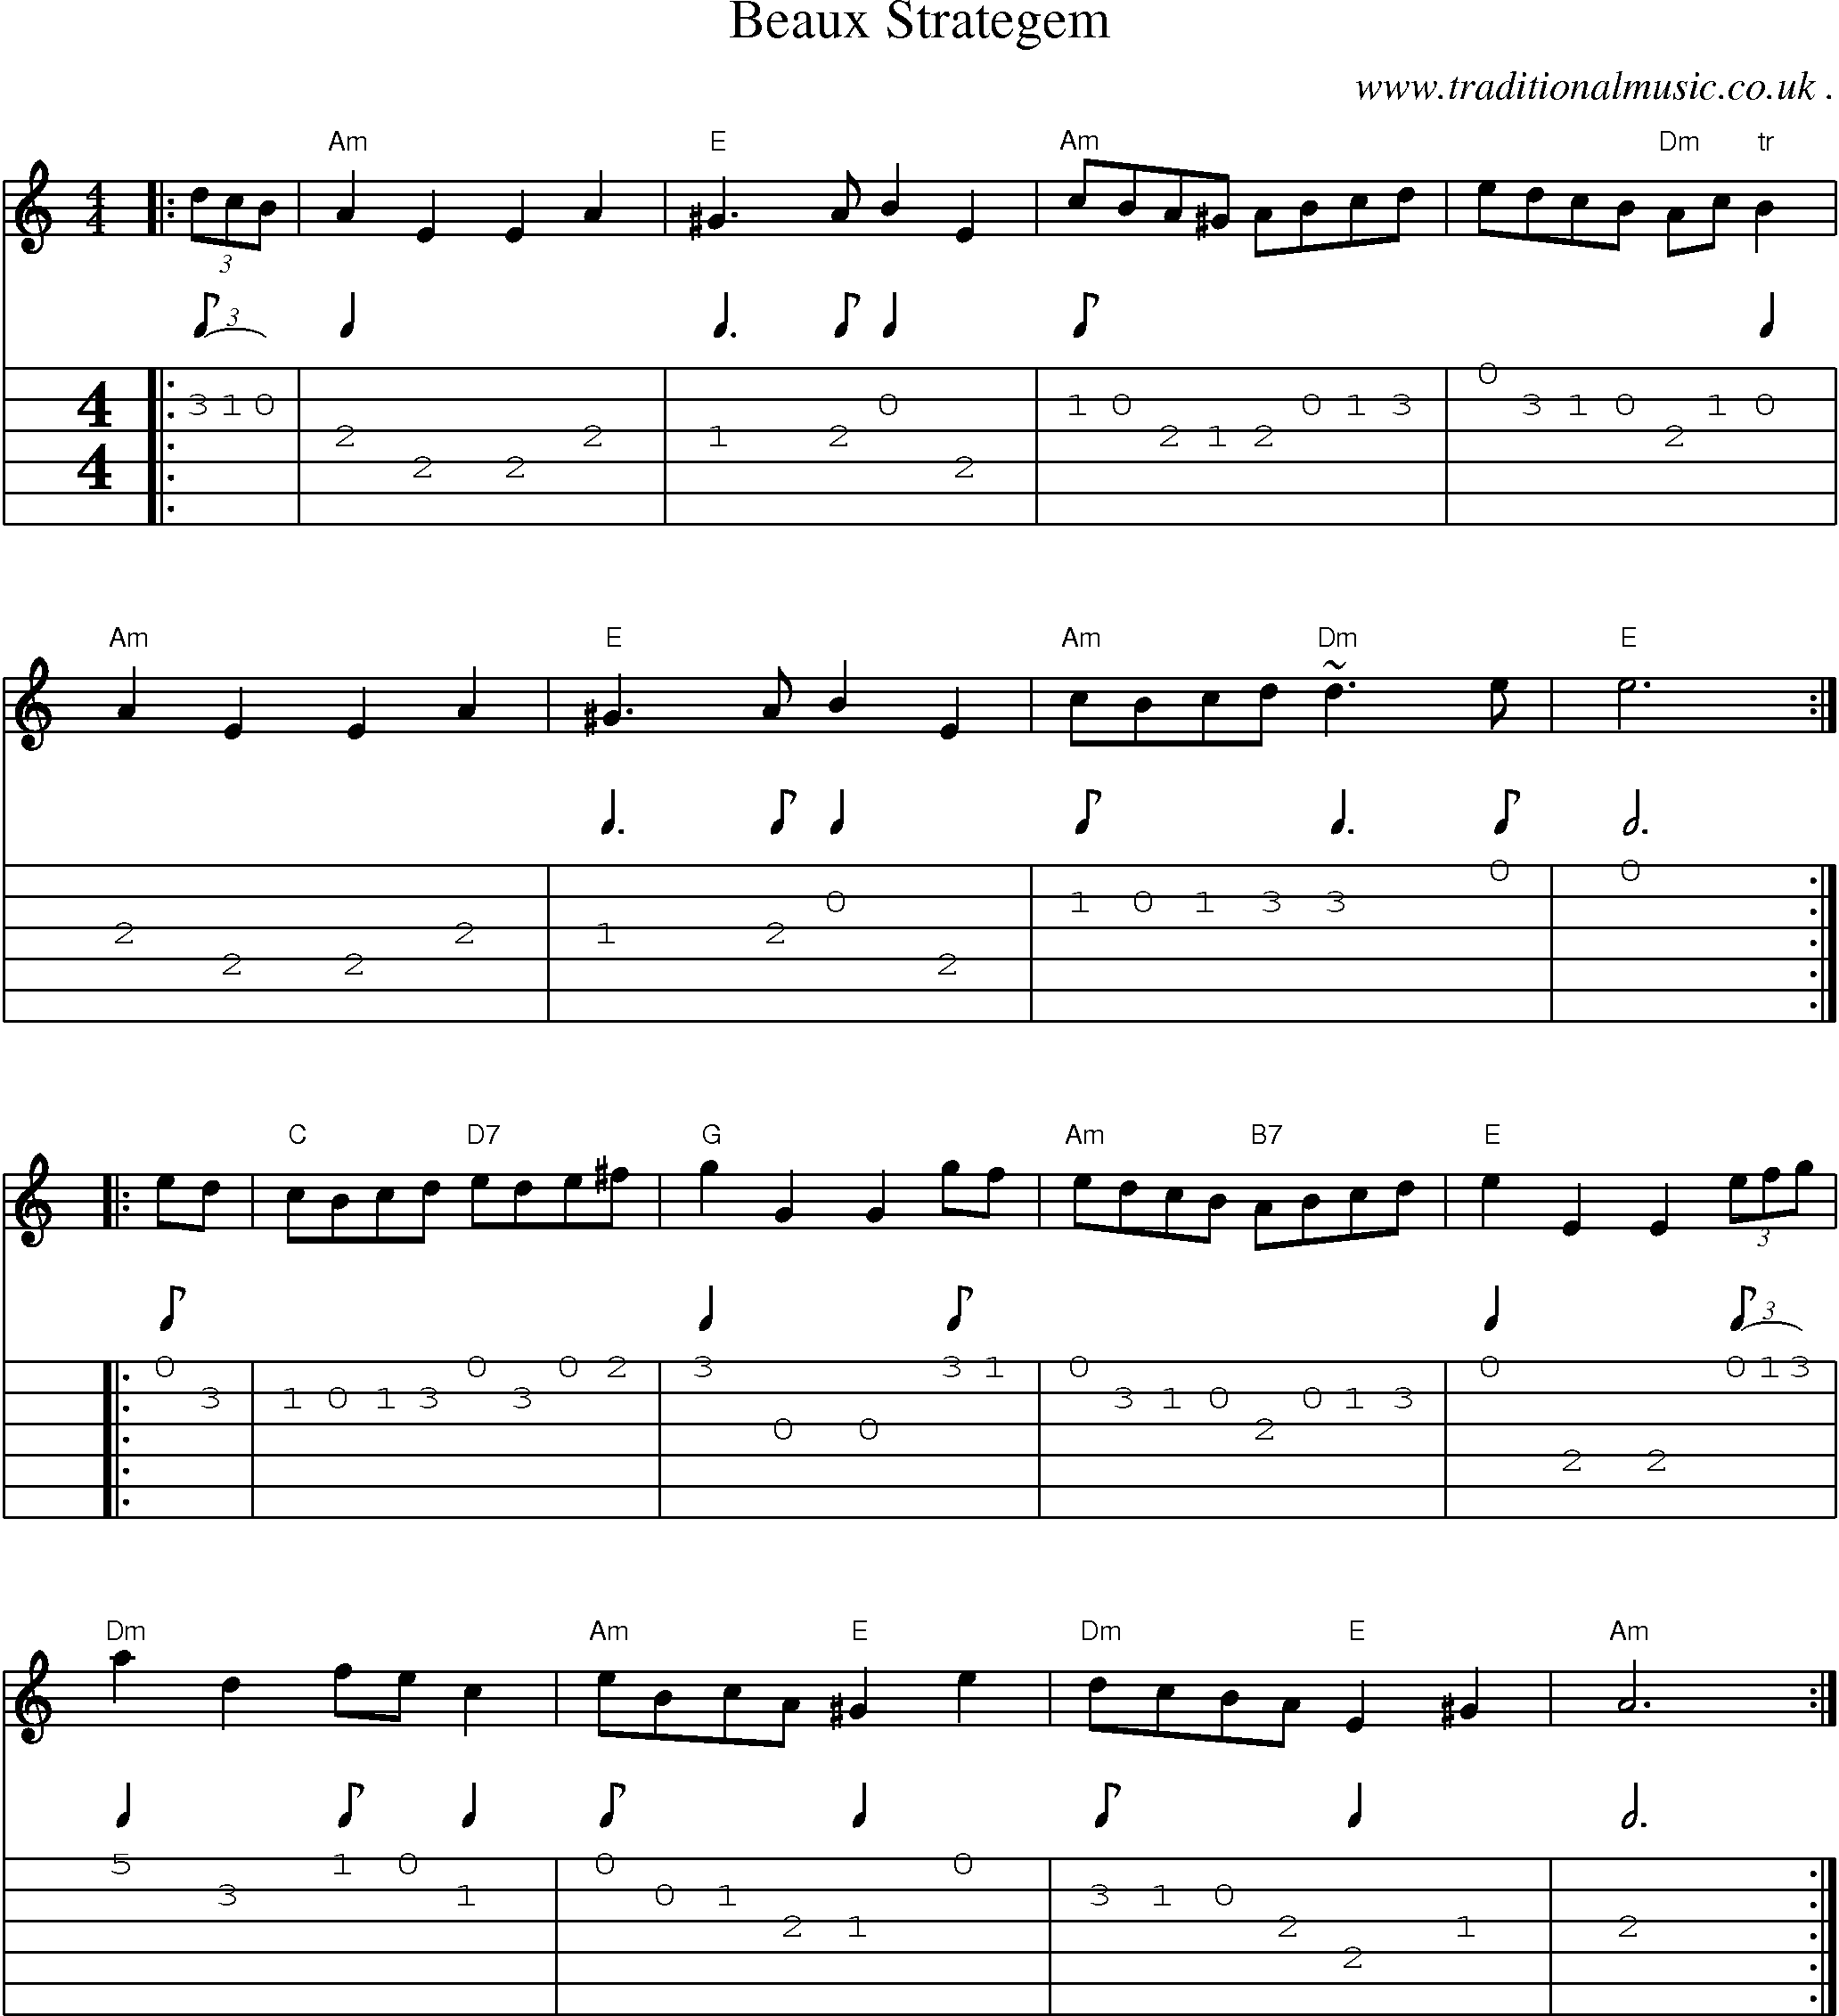 Music Score and Guitar Tabs for Beaux Strategem